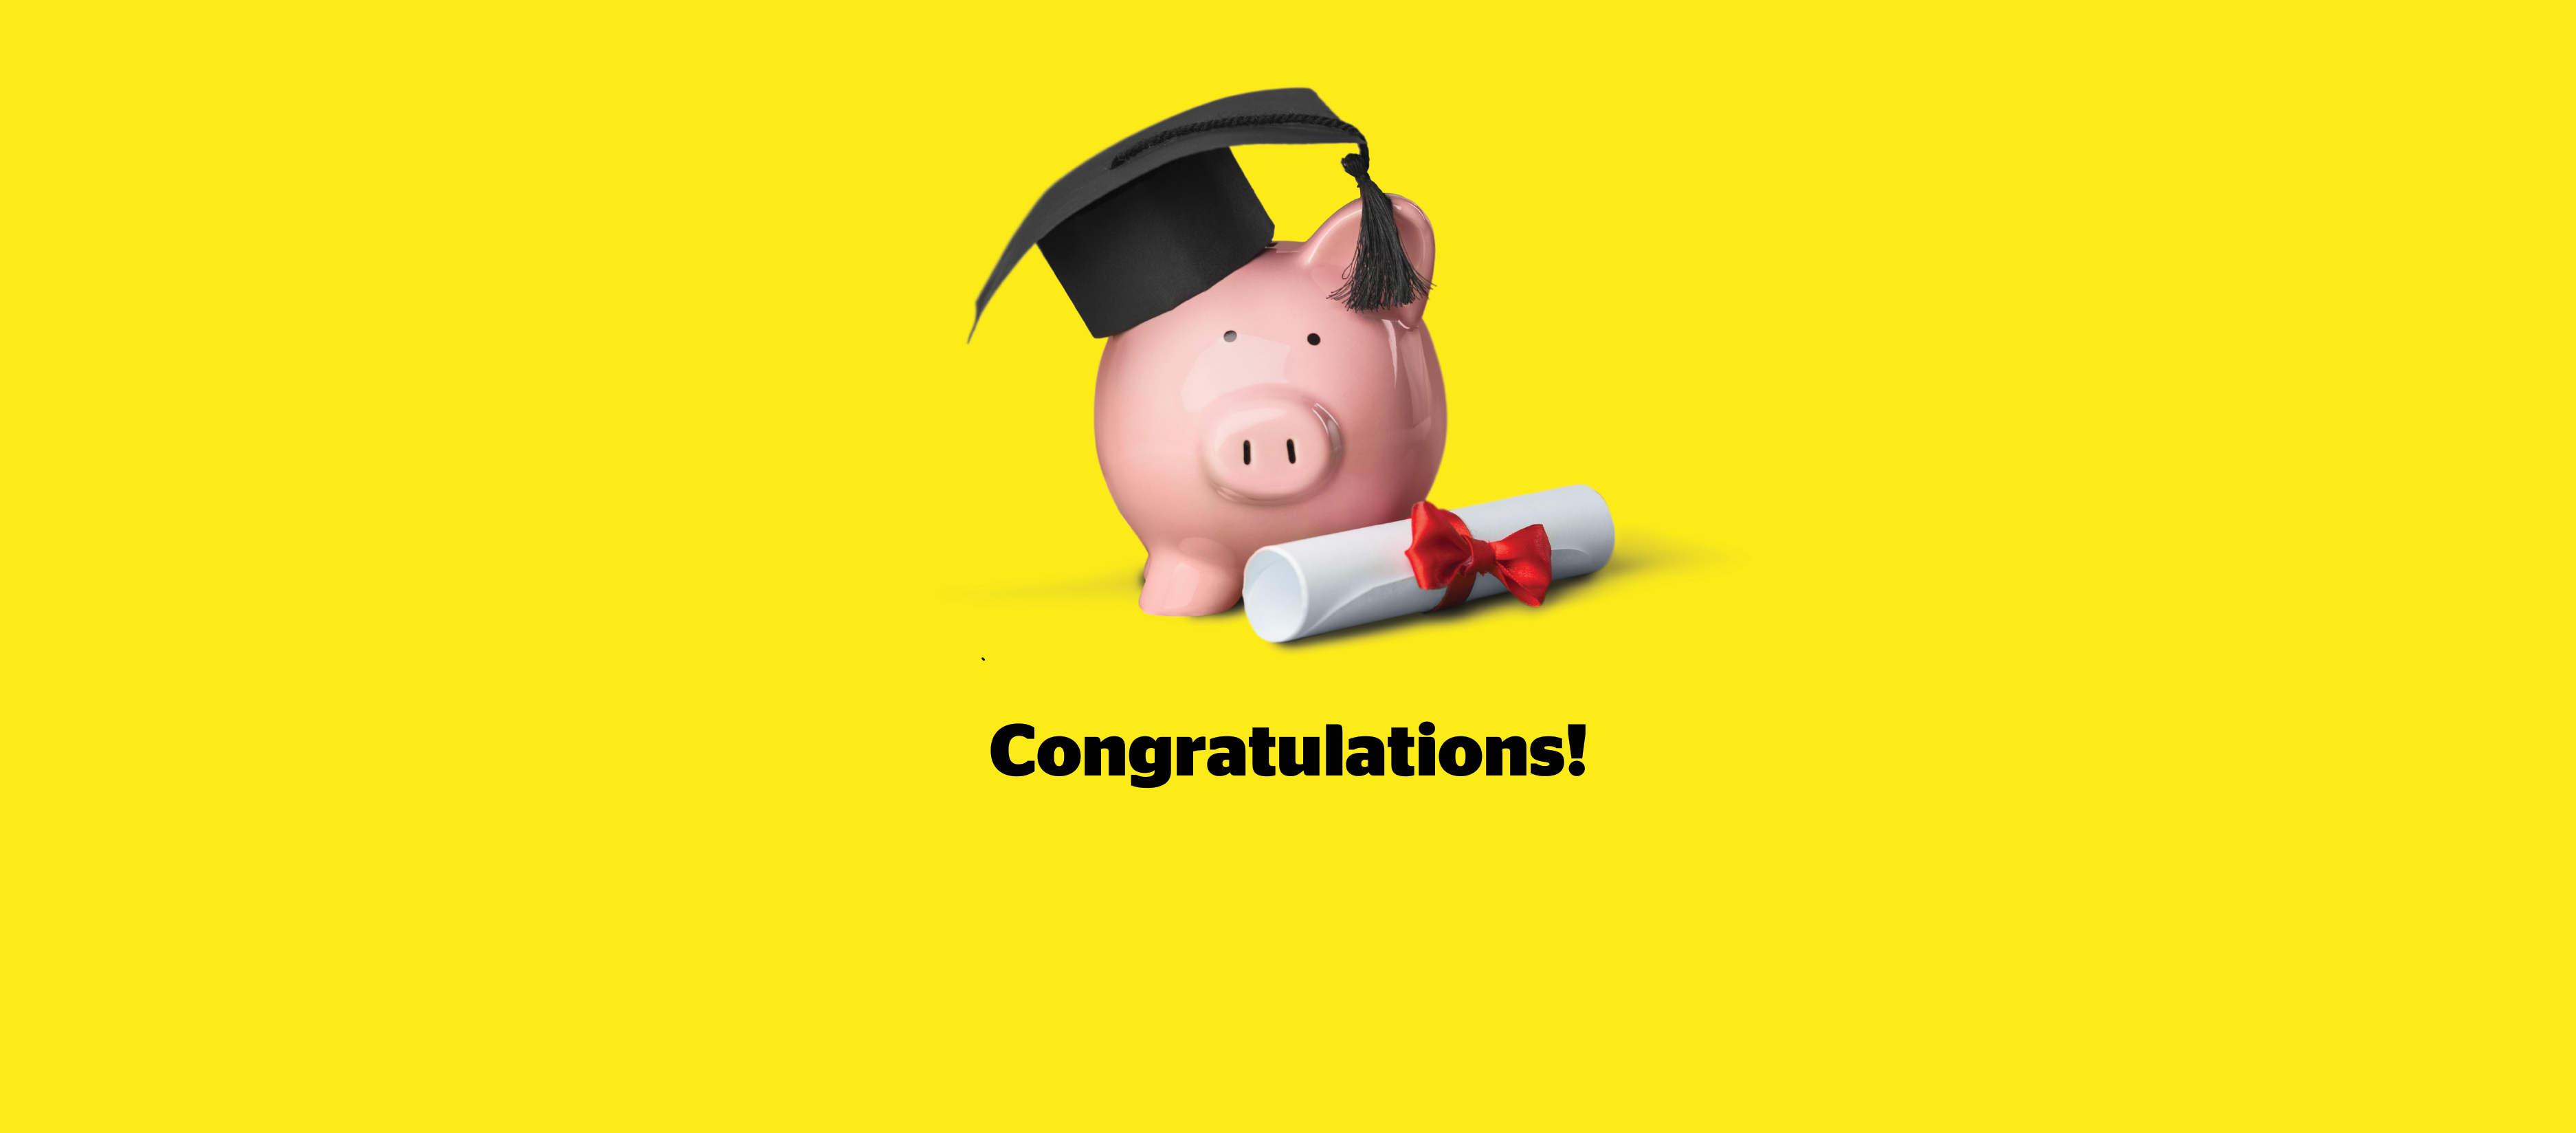 An illustration of a pink piggy bank, wearing a black graduation cap, on a yellow background. A diploma sits at the foot of the piggy bank. Text: Congratulations!